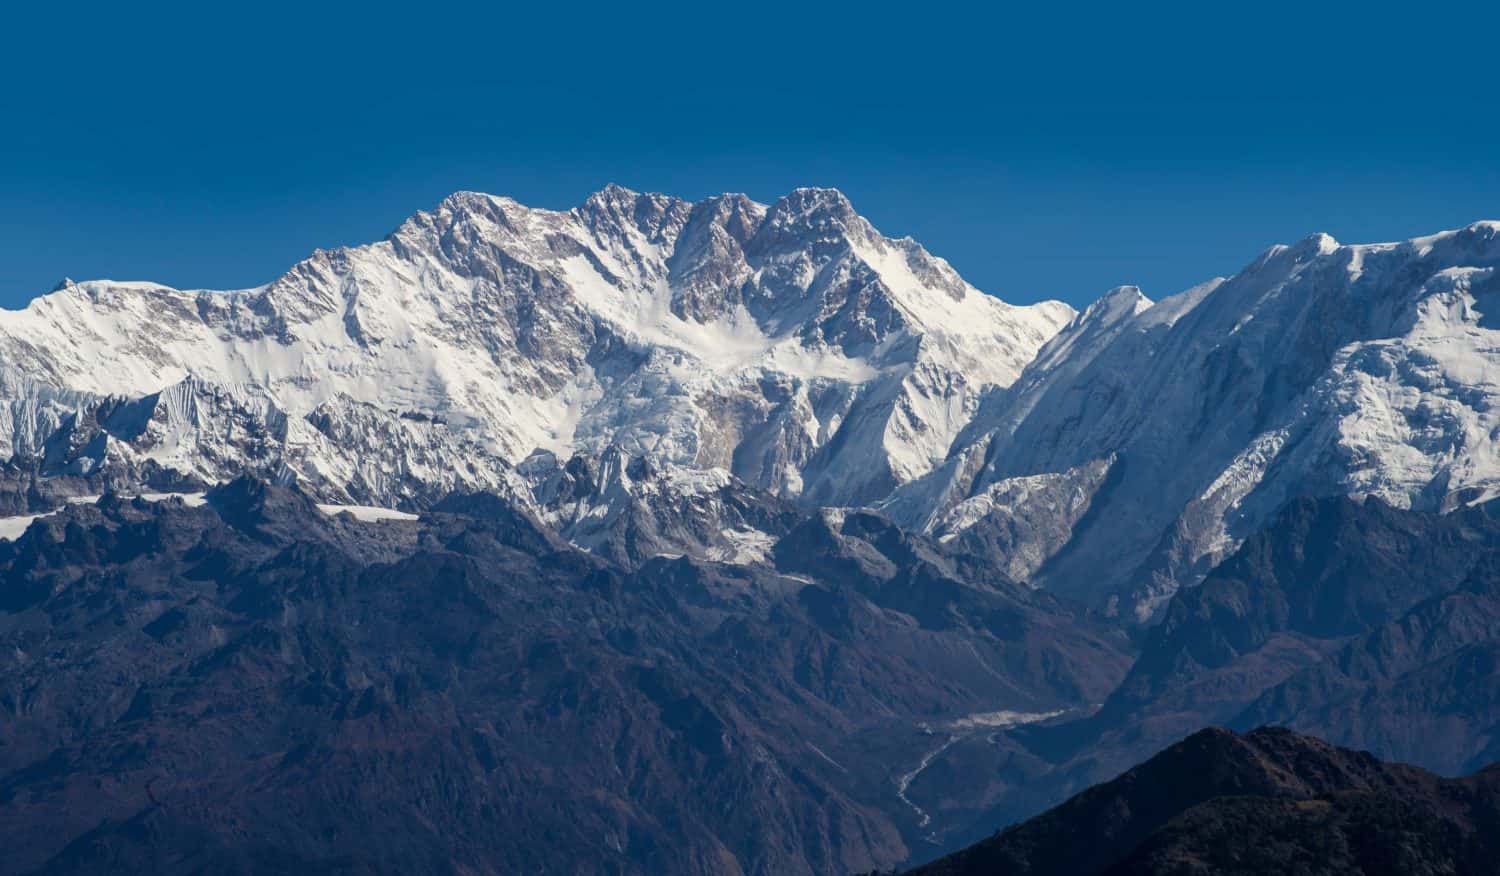 Kangchenjunga, also spelled Kanchenjunga, is the third highest mountain in the world, Nepal